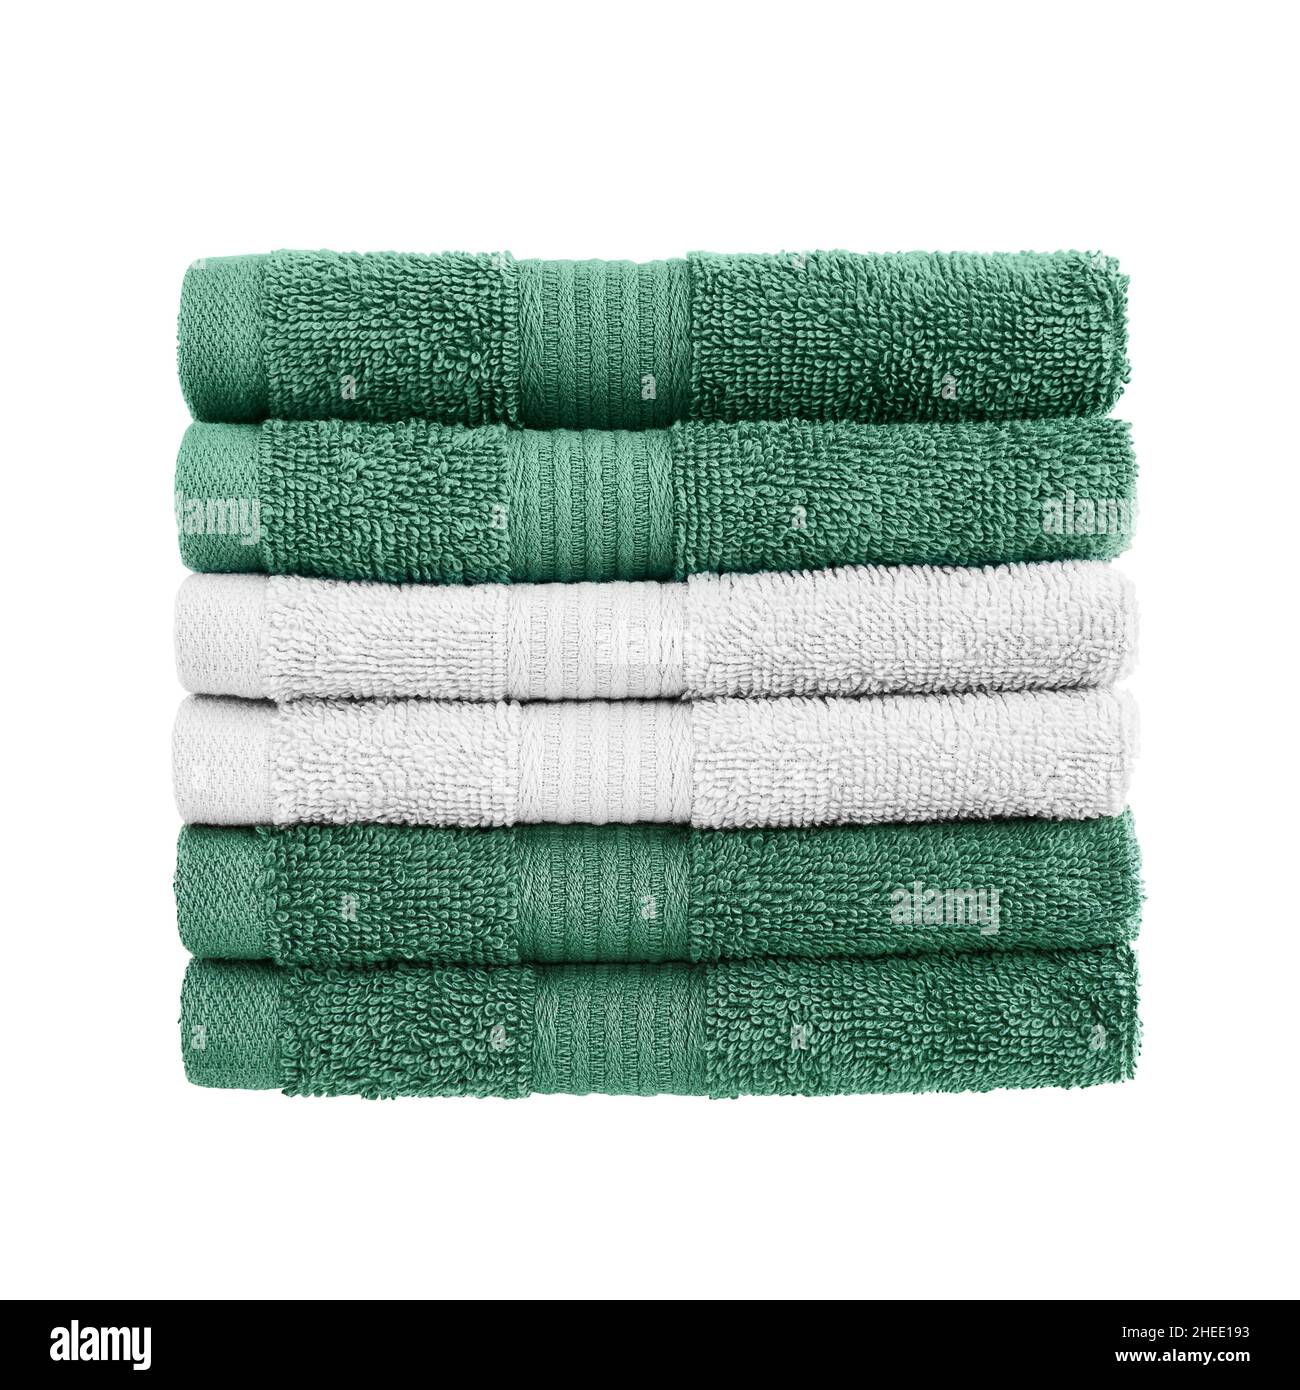 Folded in stack green and gray towels isolated over white background with clipping path. Stock Photo